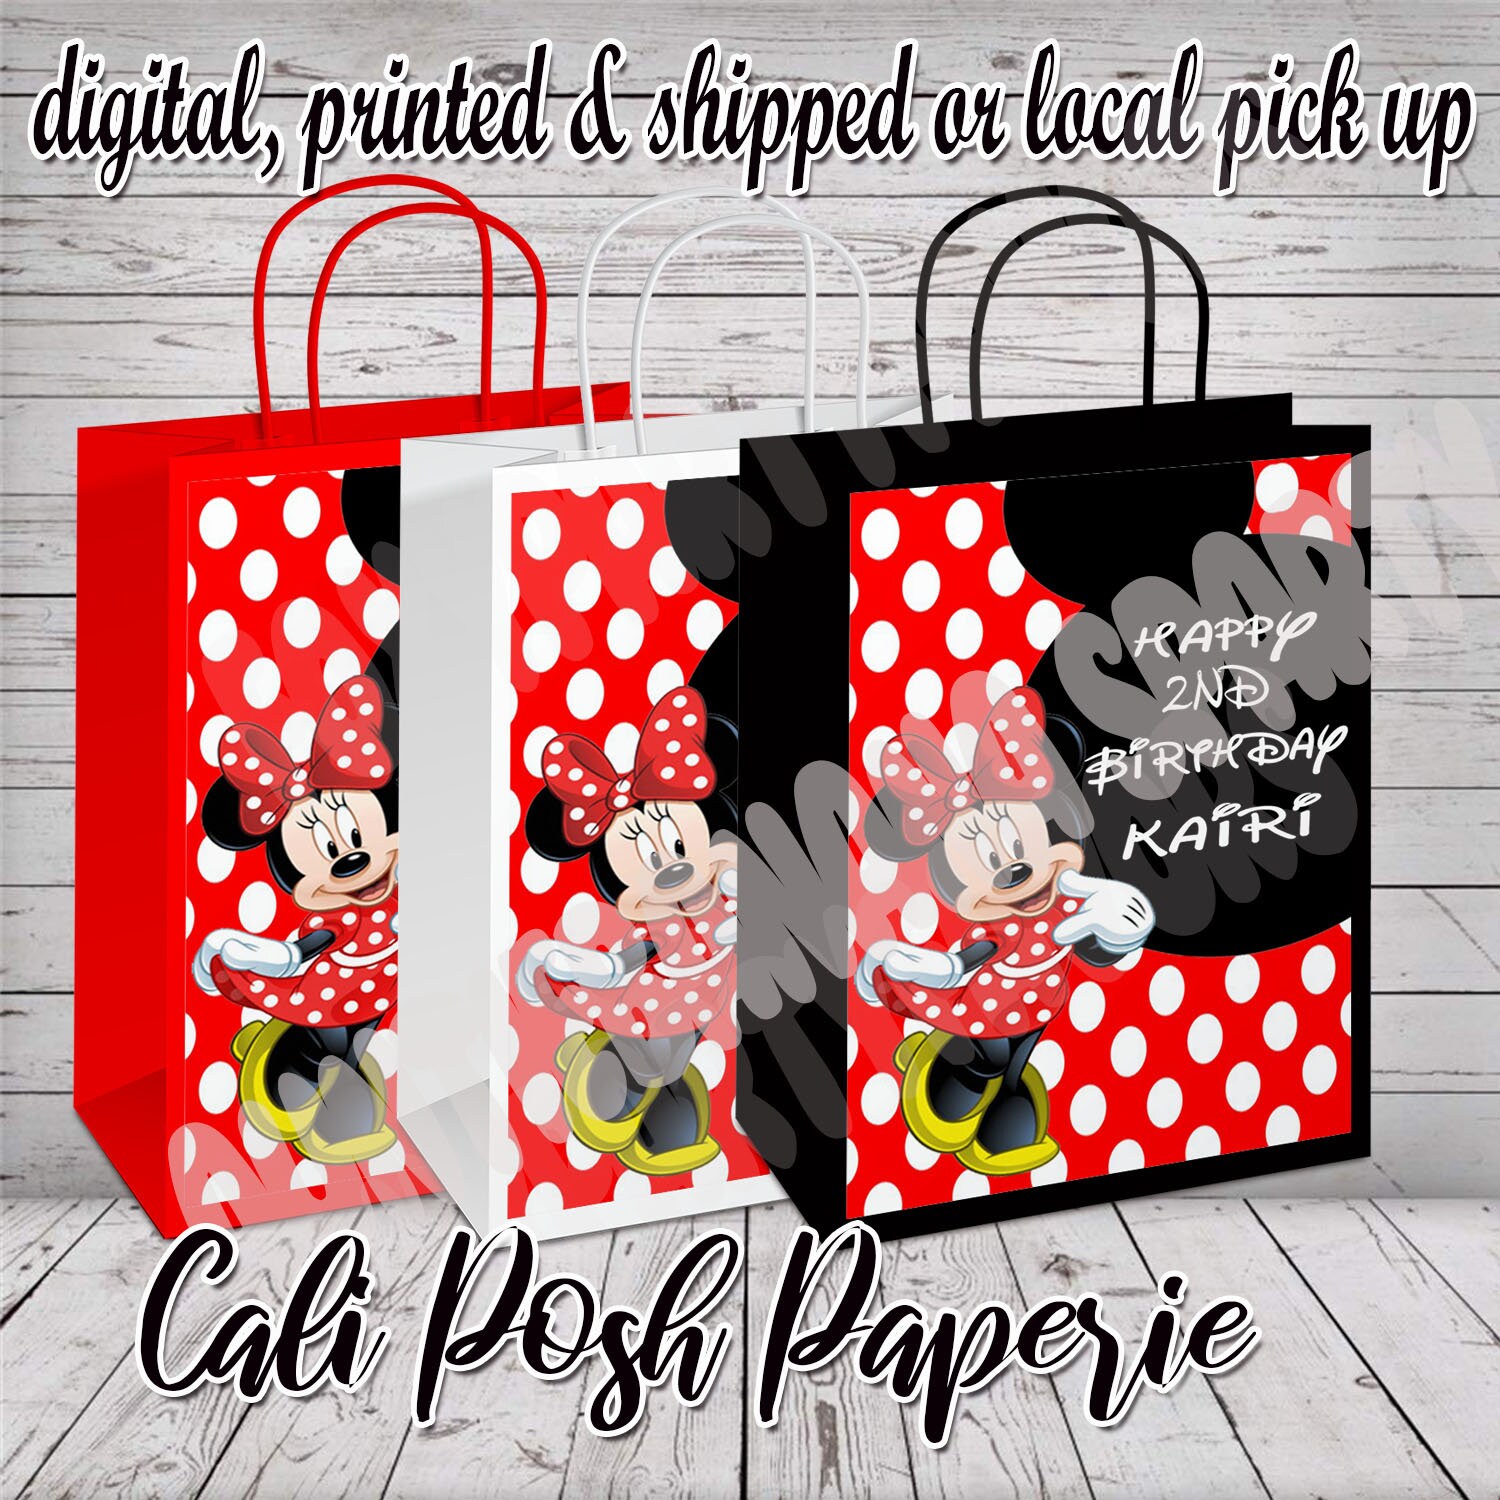 Minnie Mouse Water Bottle Labels - Minnie Mouse Birthday – Cute Pixels Shop